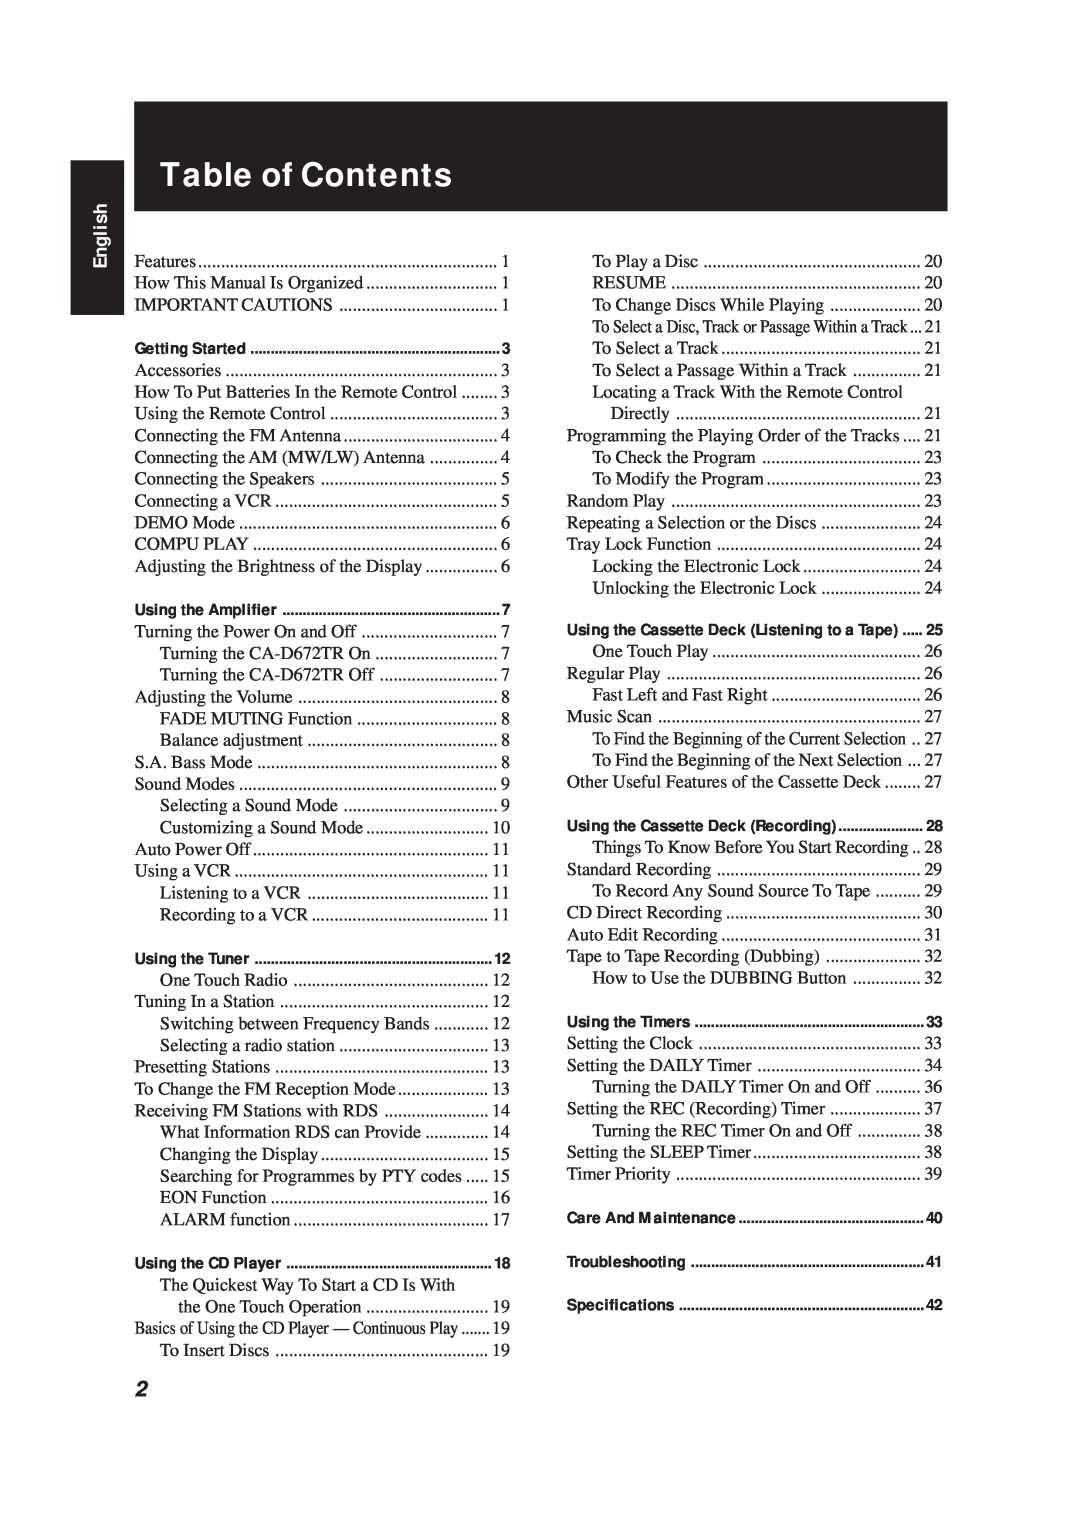 JVC CA-D672TR manual Table of Contents, English 